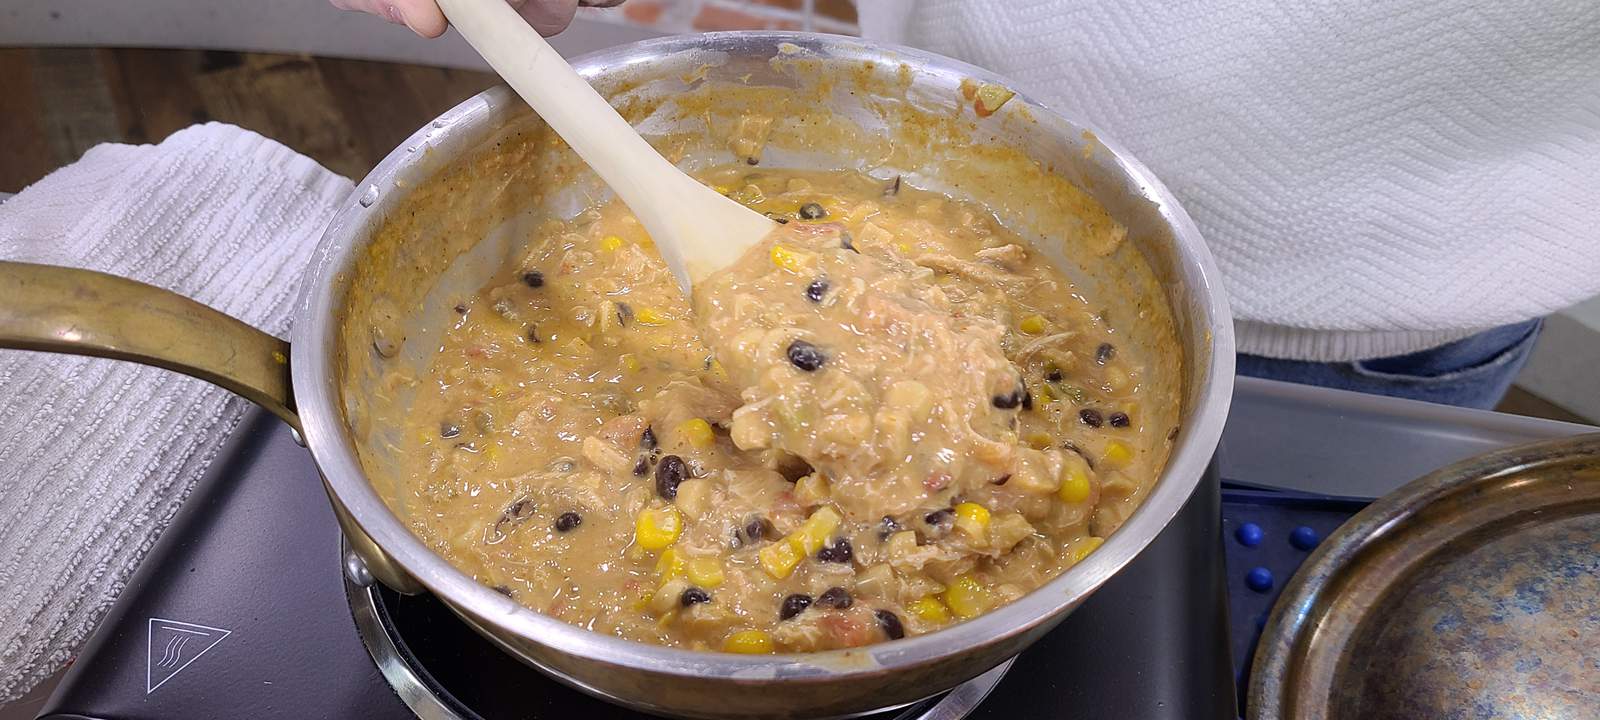 Mike’s cheesy chicken tortilla soup feeds entire family for less than $25